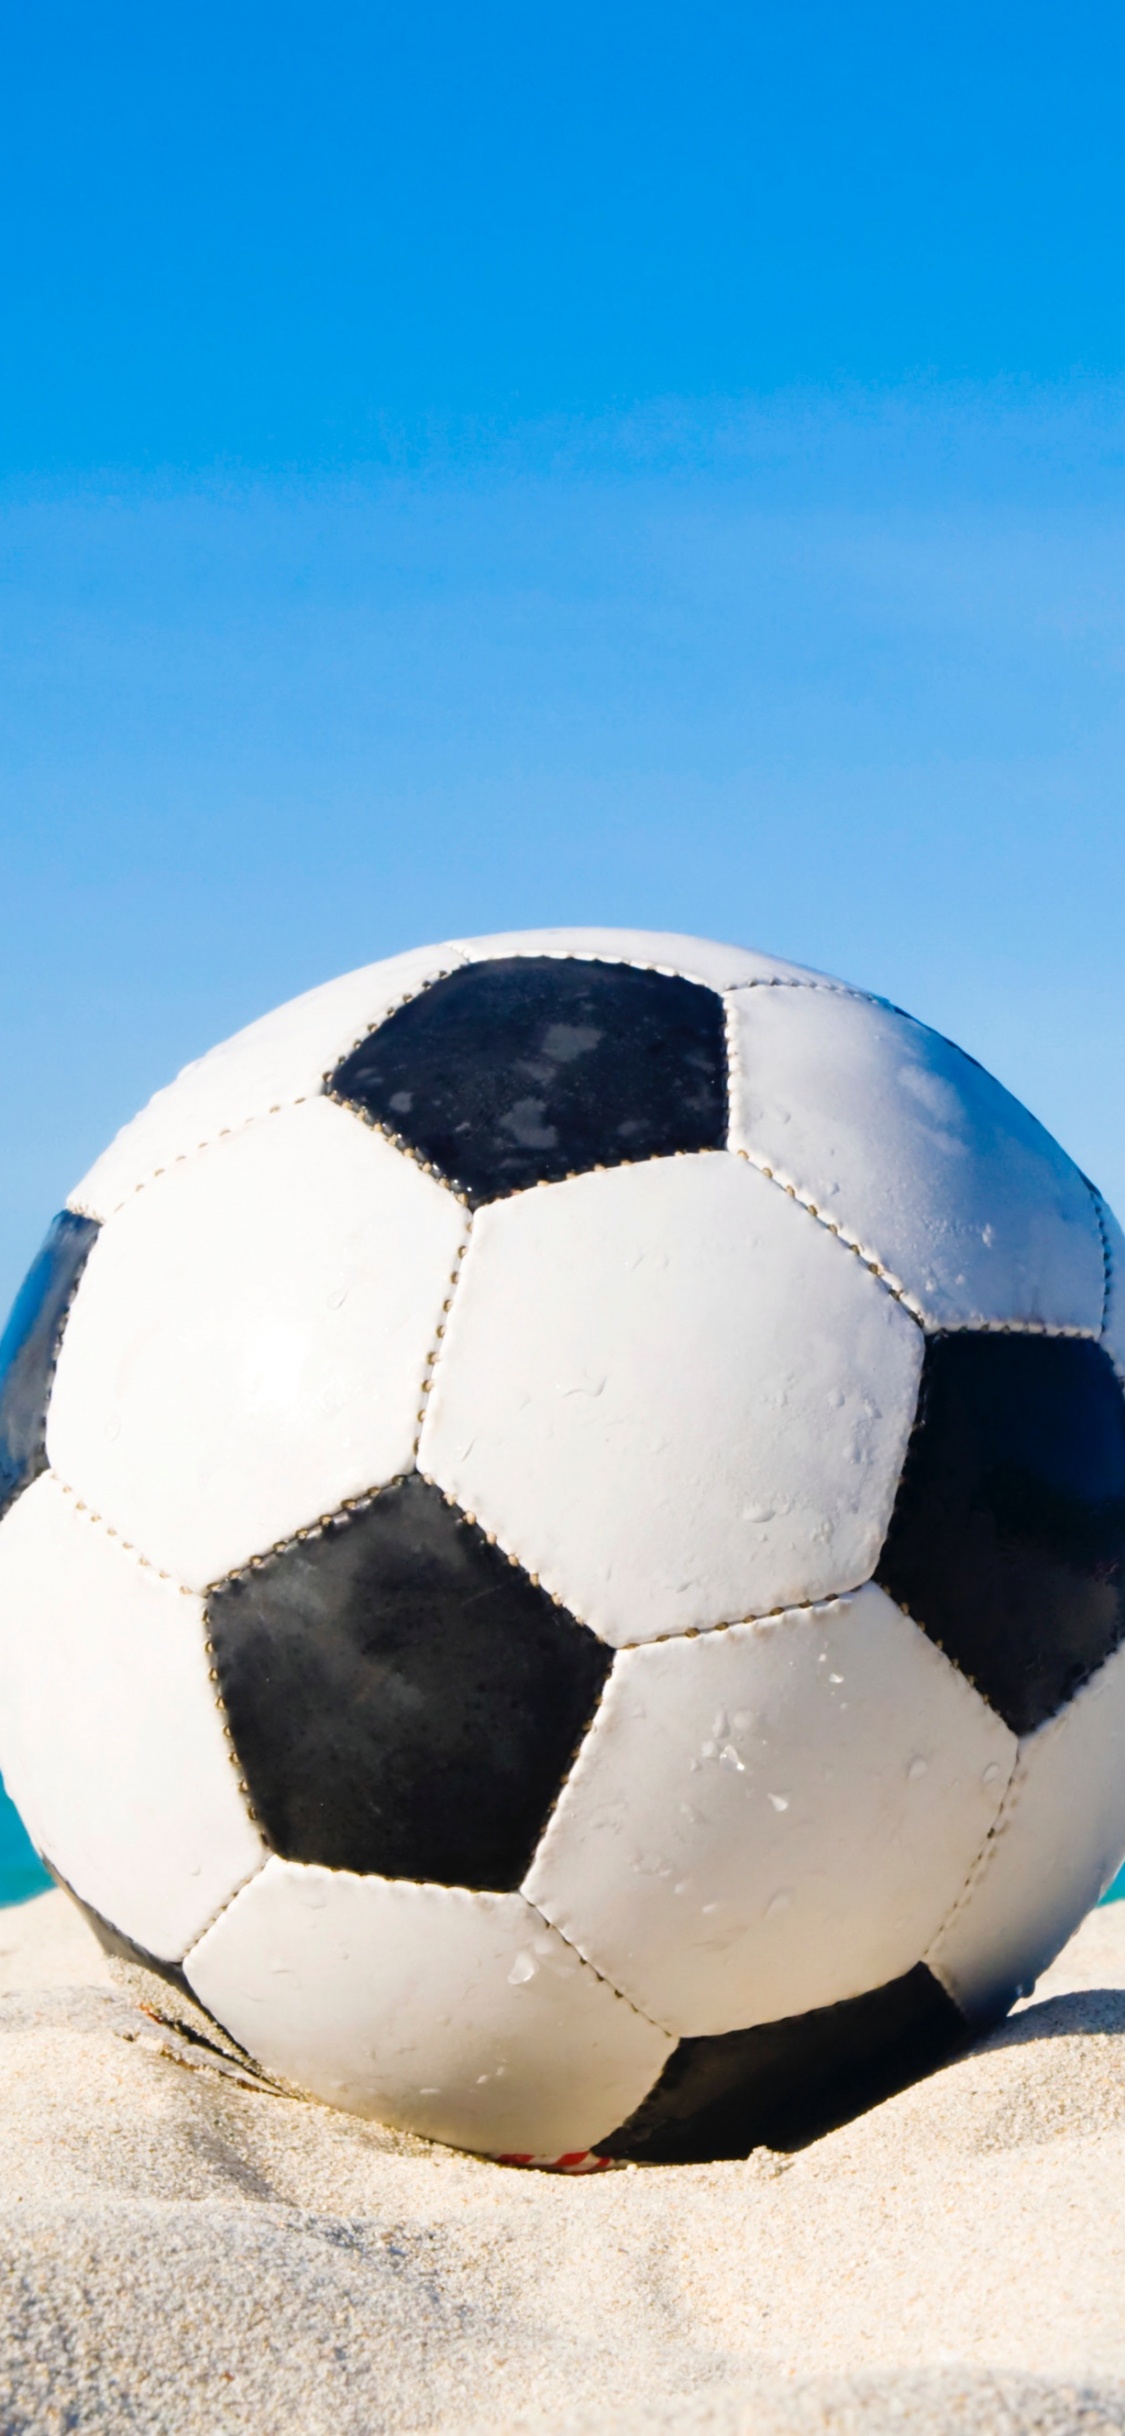 White and Black Soccer Ball on White Sand During Daytime. Wallpaper in 1125x2436 Resolution